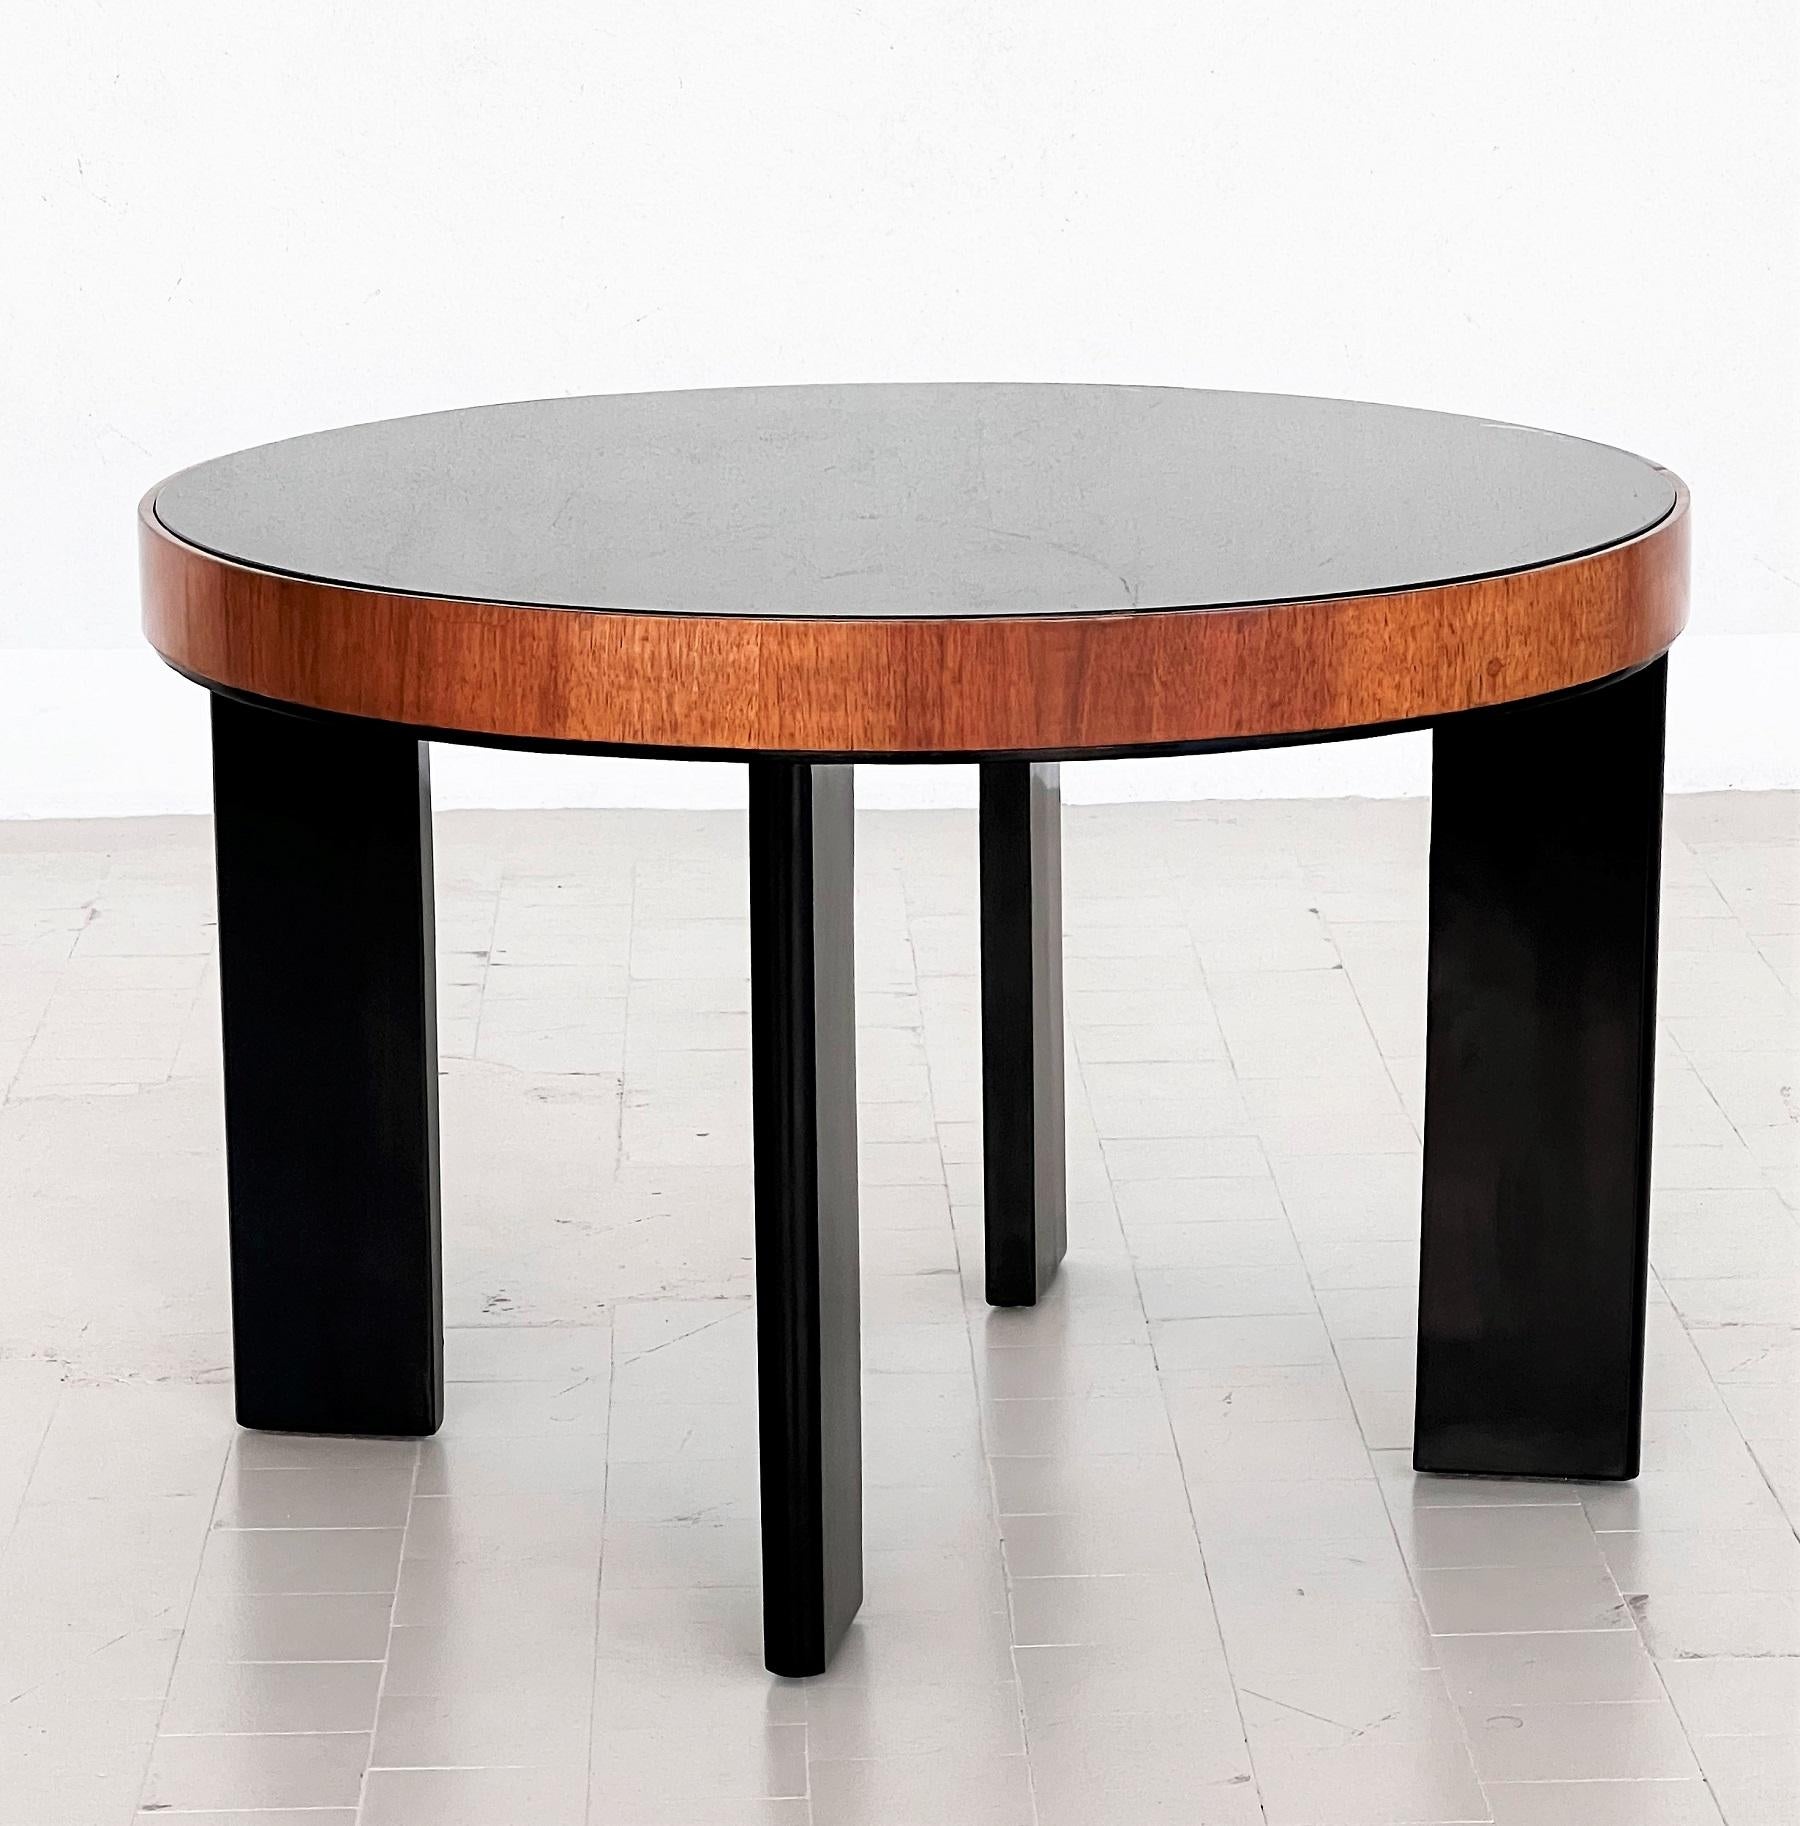 Beautiful coffee table or side table in the style of Art Deco, beginning of the 20th century.
Made in Italy circa in the 1970s.
The table legs are made of a solid wooden base lacquered in black color.
The round border around the table is made of